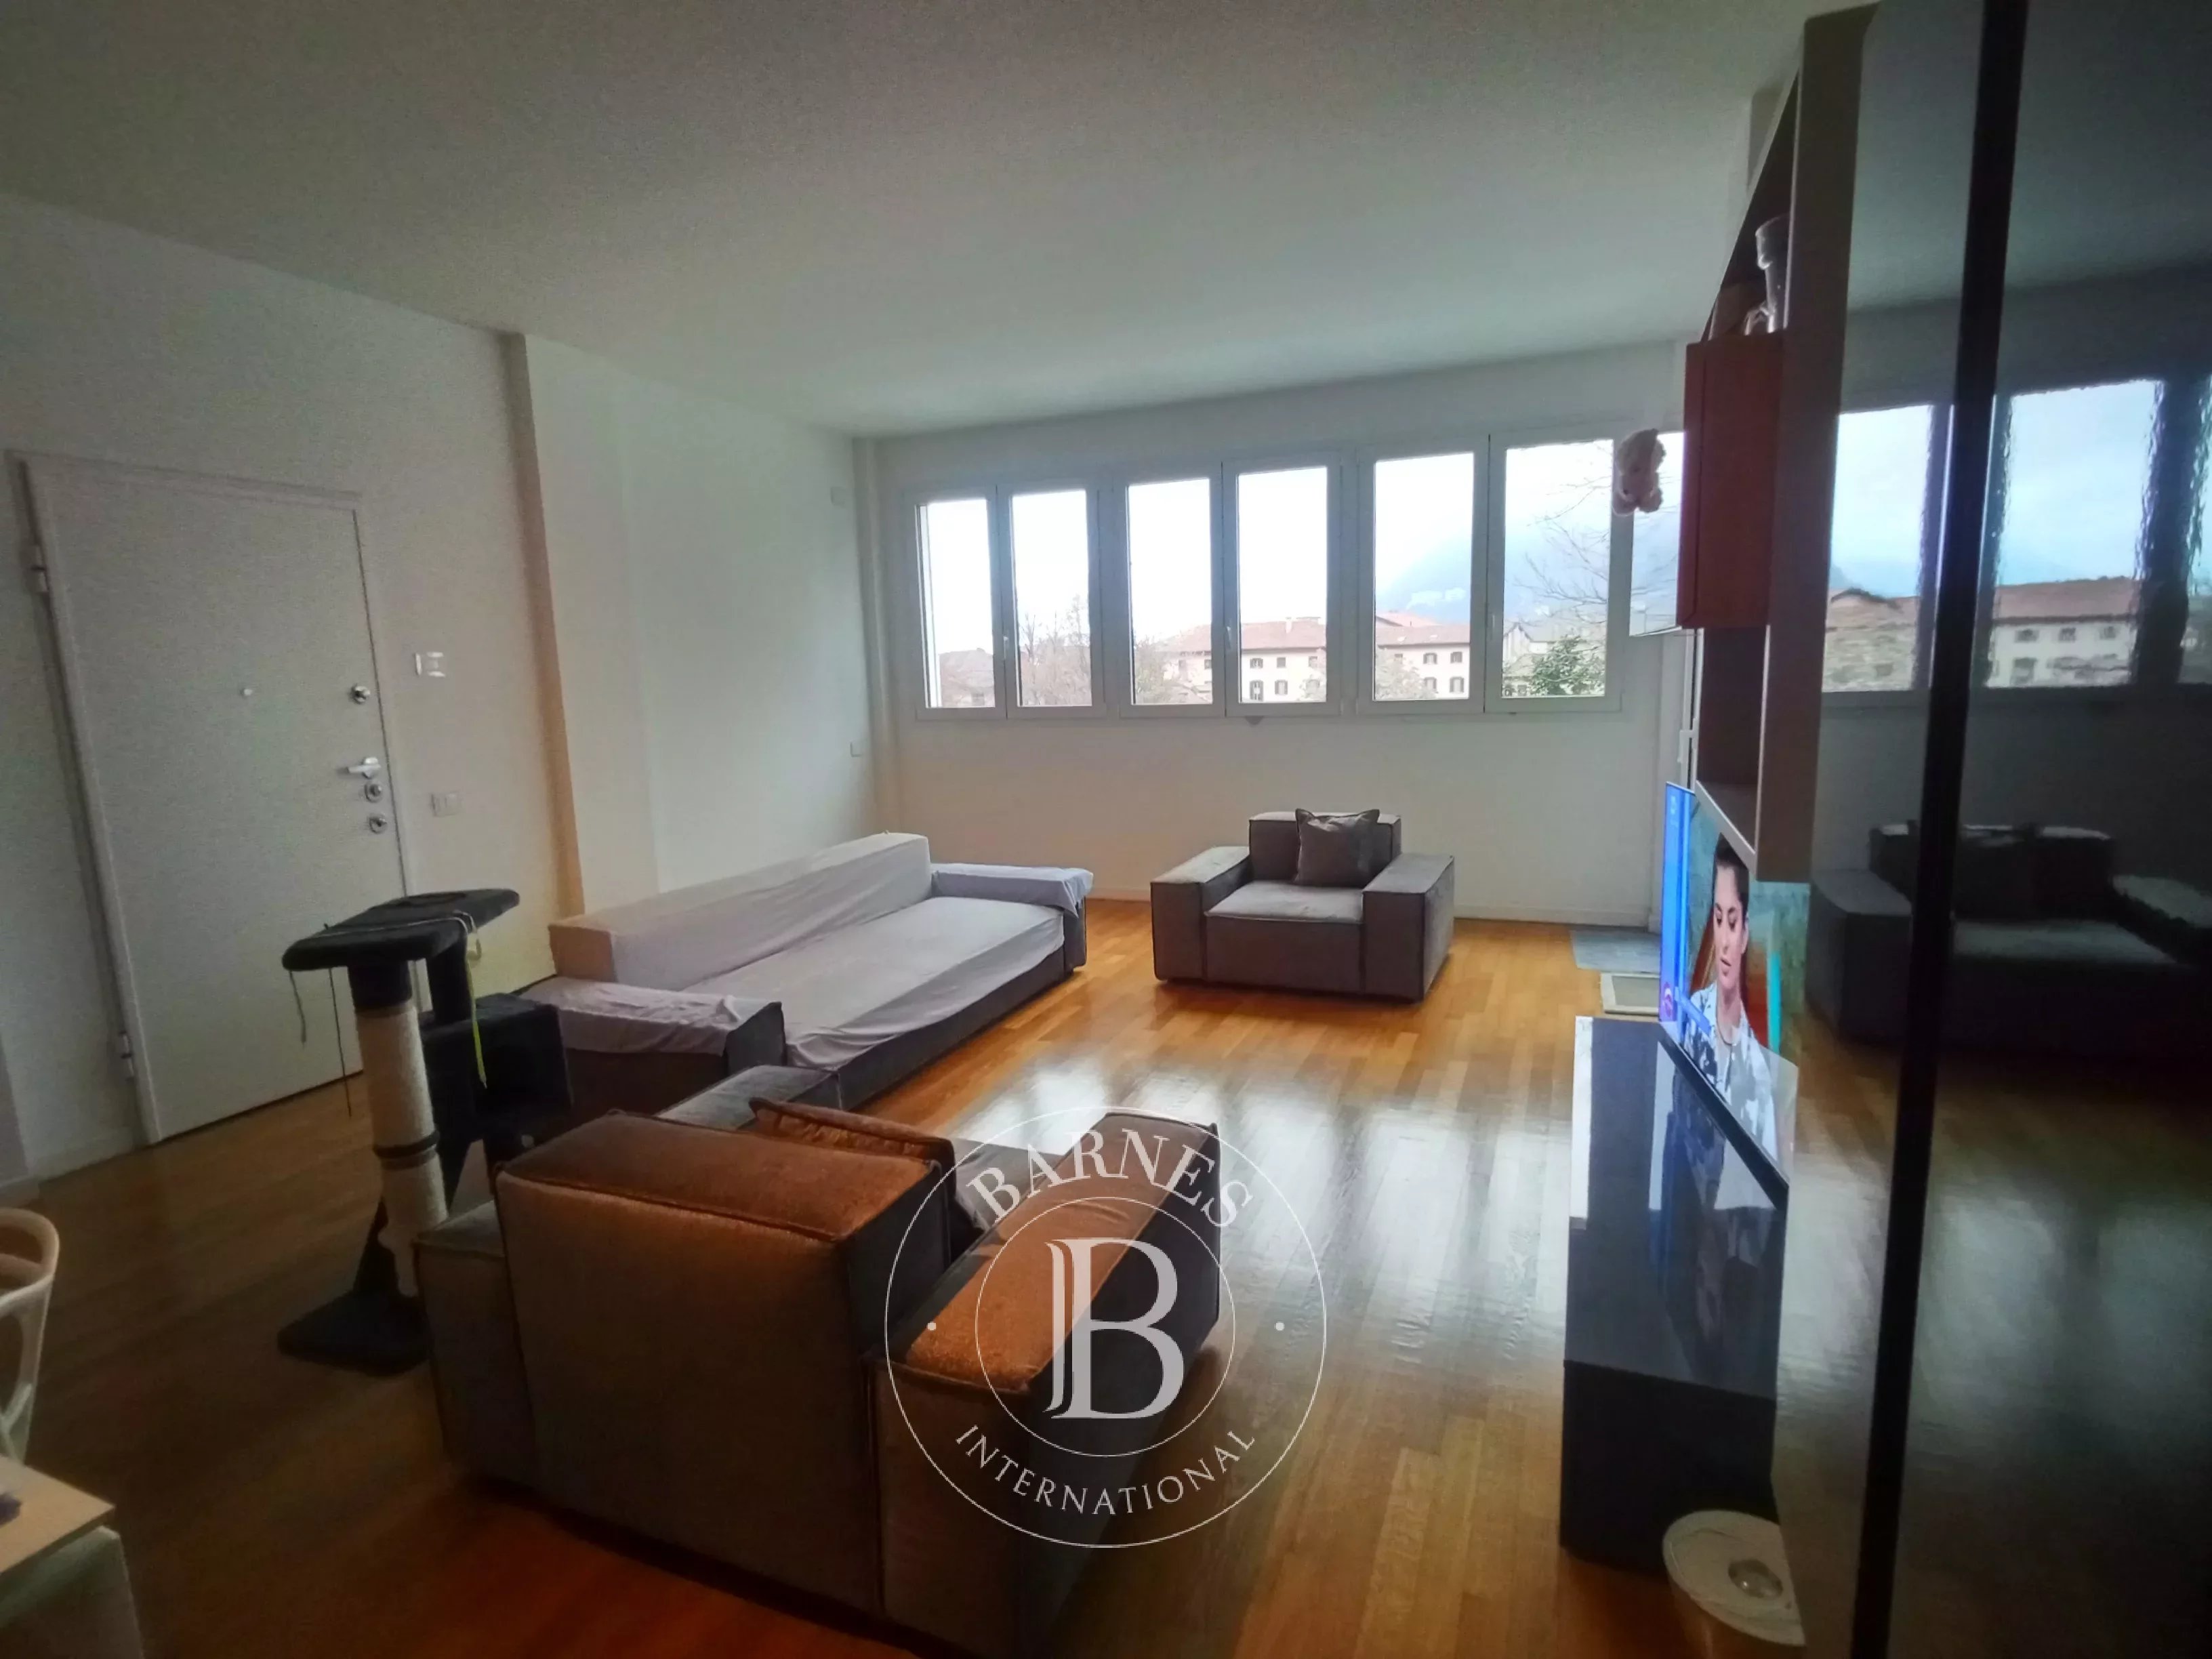 three-room apartment lake view COMO - picture 5 title=